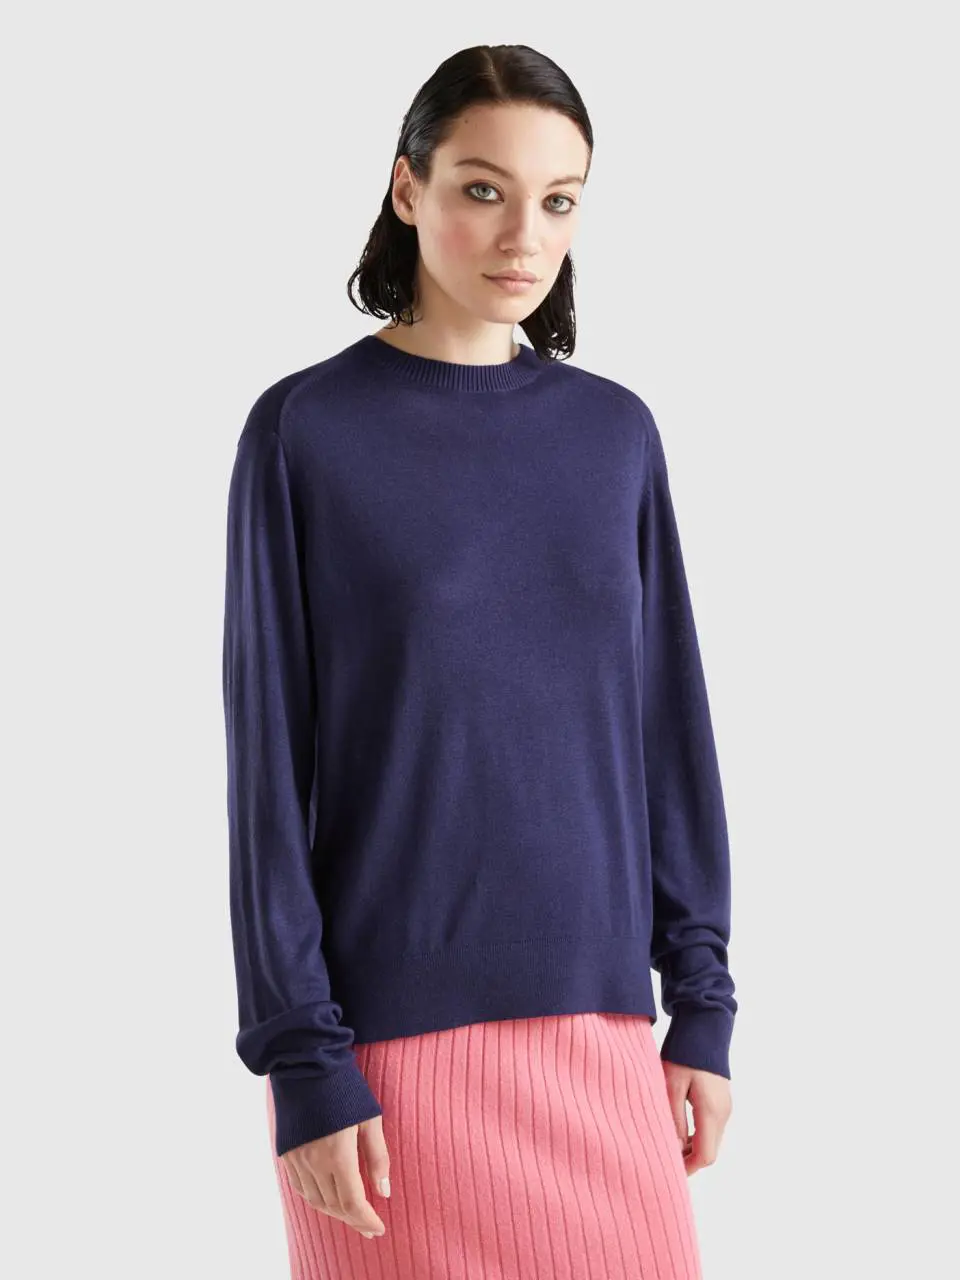 Benetton sweater in viscose blend with slits. 1